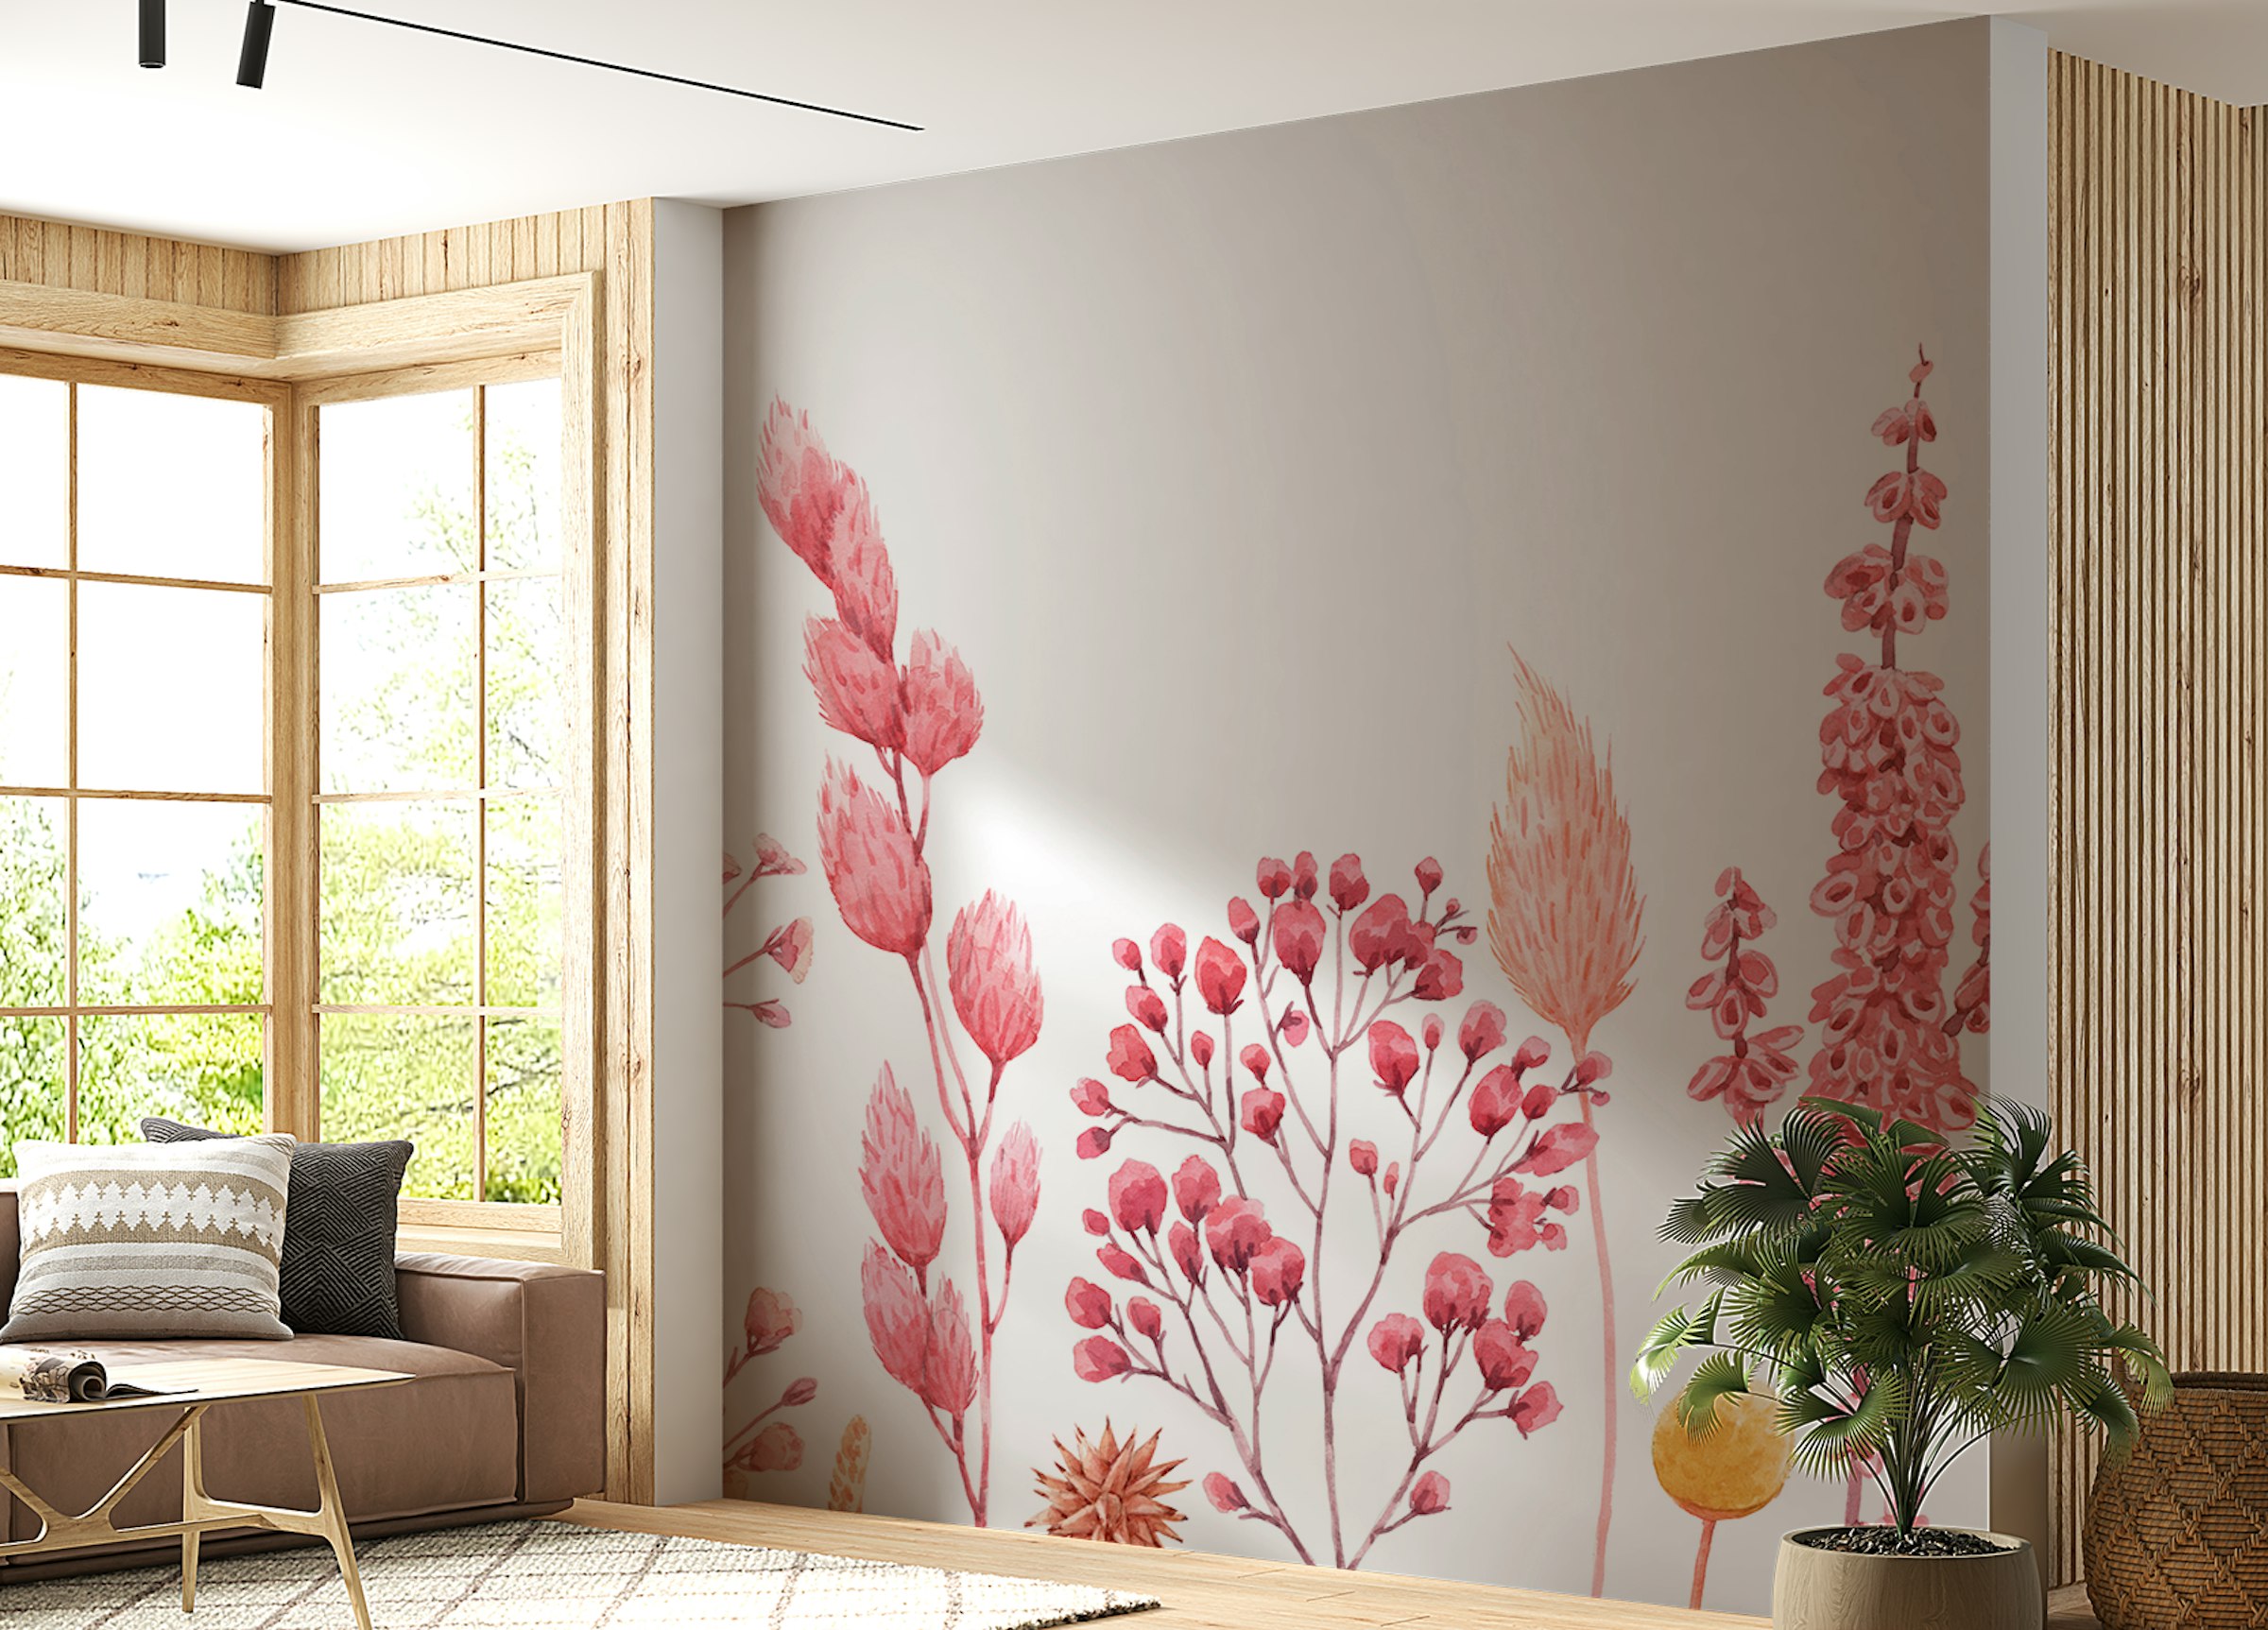 Custom made Natures Canvas Dried Flower Wall Mural